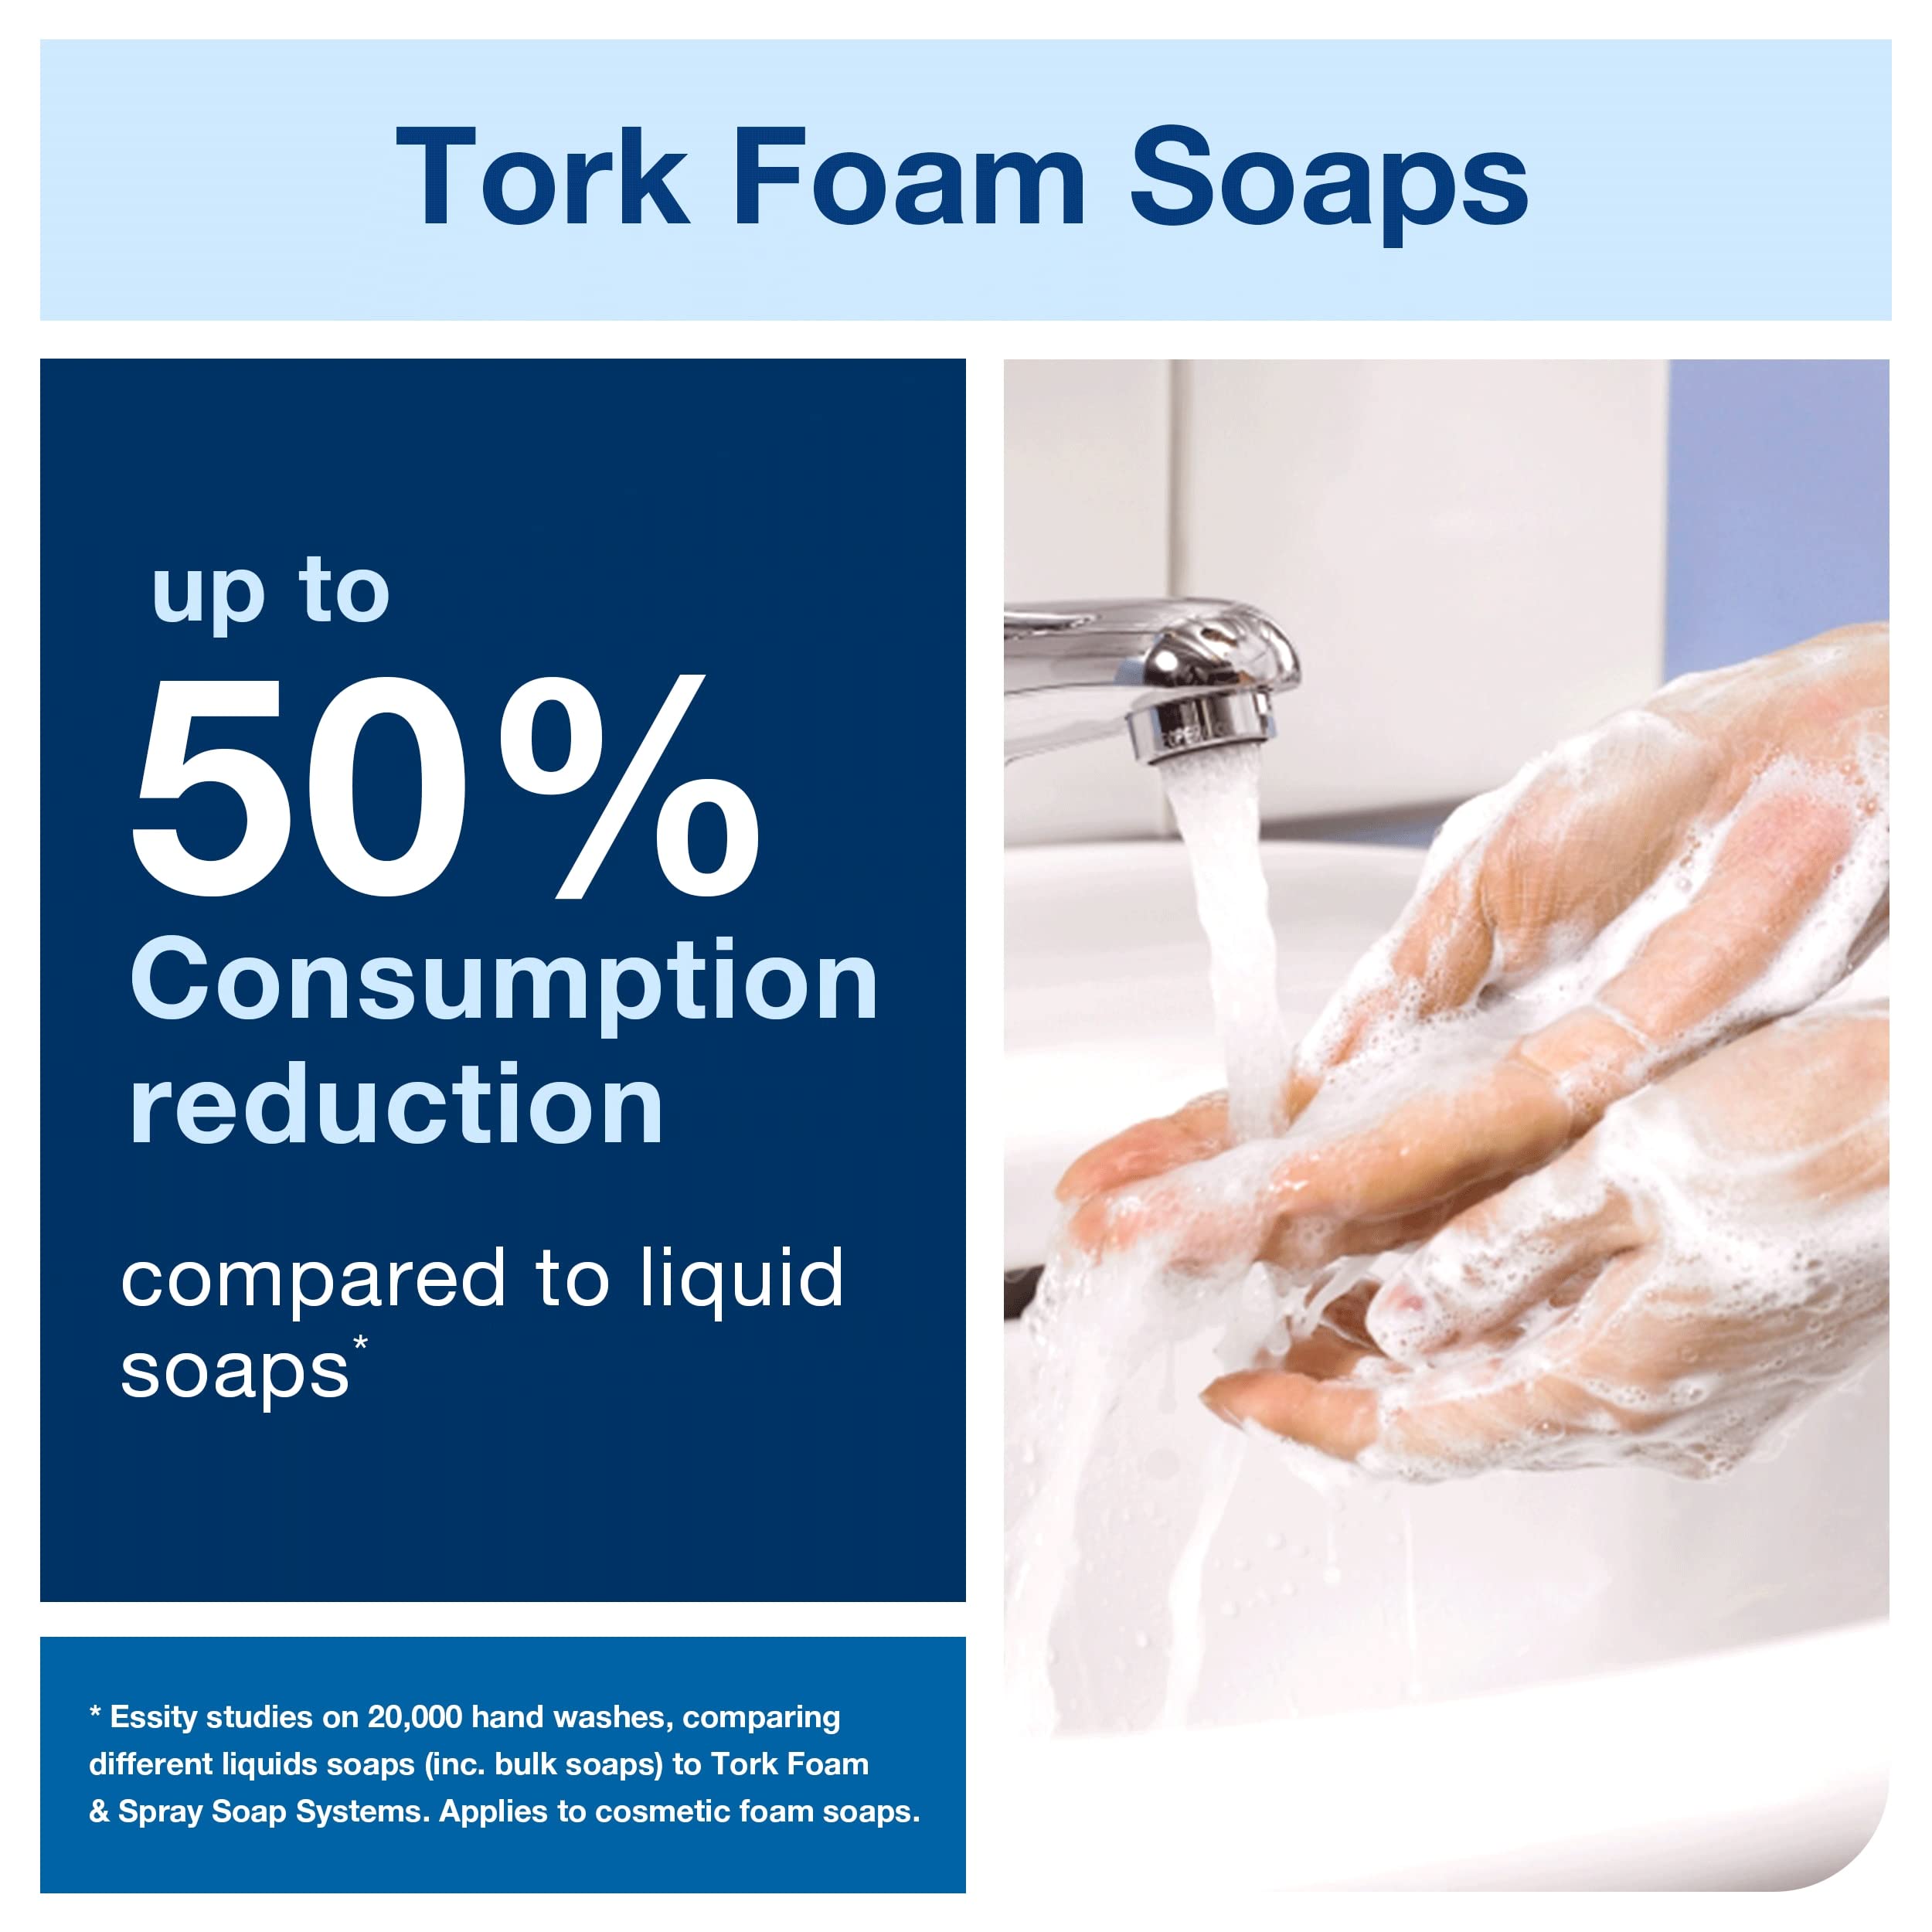 Tork Extra Mild Hand Washing Foam Soap S4, No Fragrance Added, 6 x 1L, 401811 (formerly 401211)